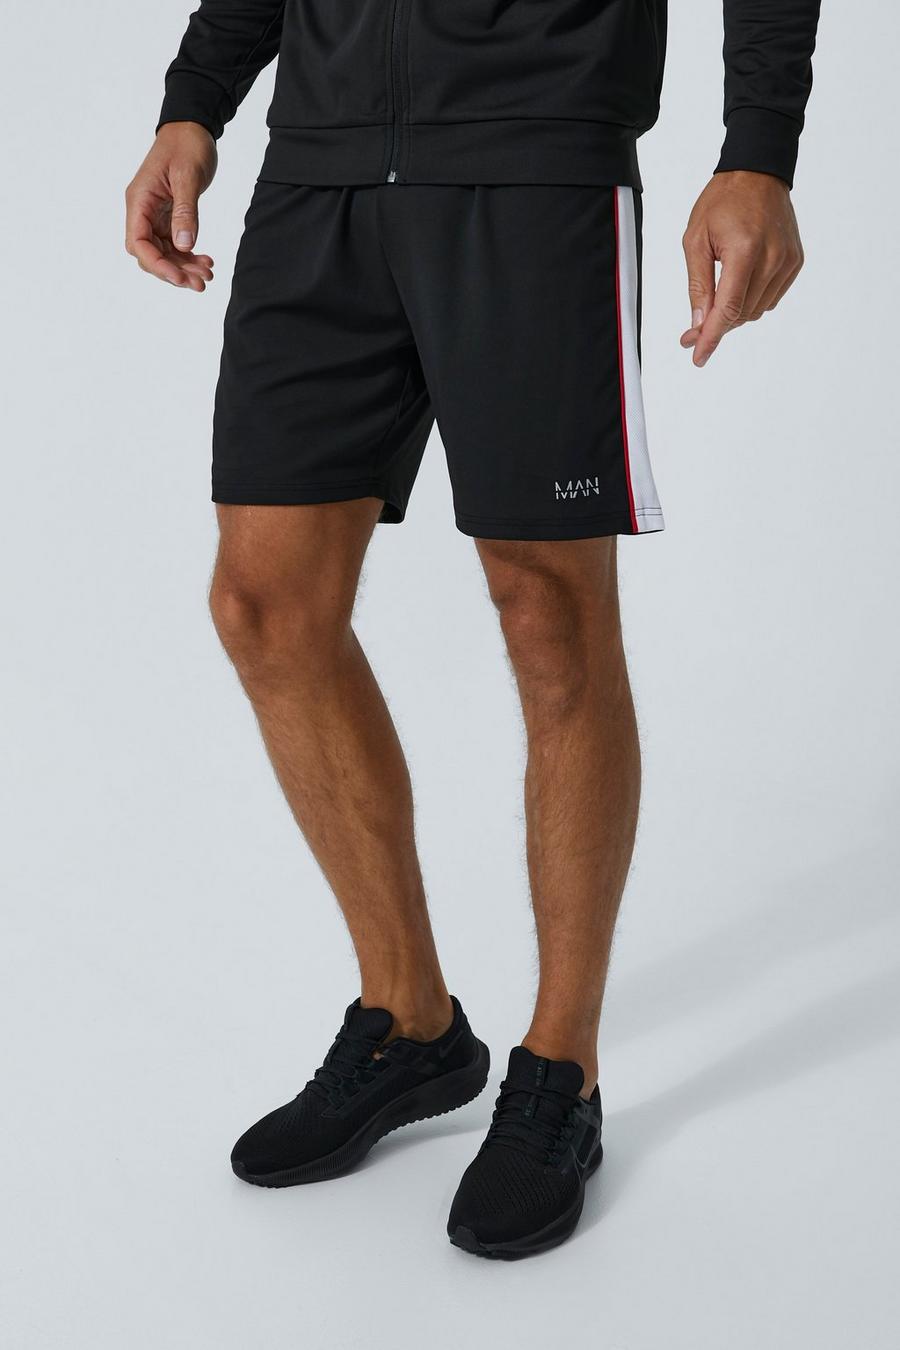 Black Tall Man Active Performance Training Shorts image number 1